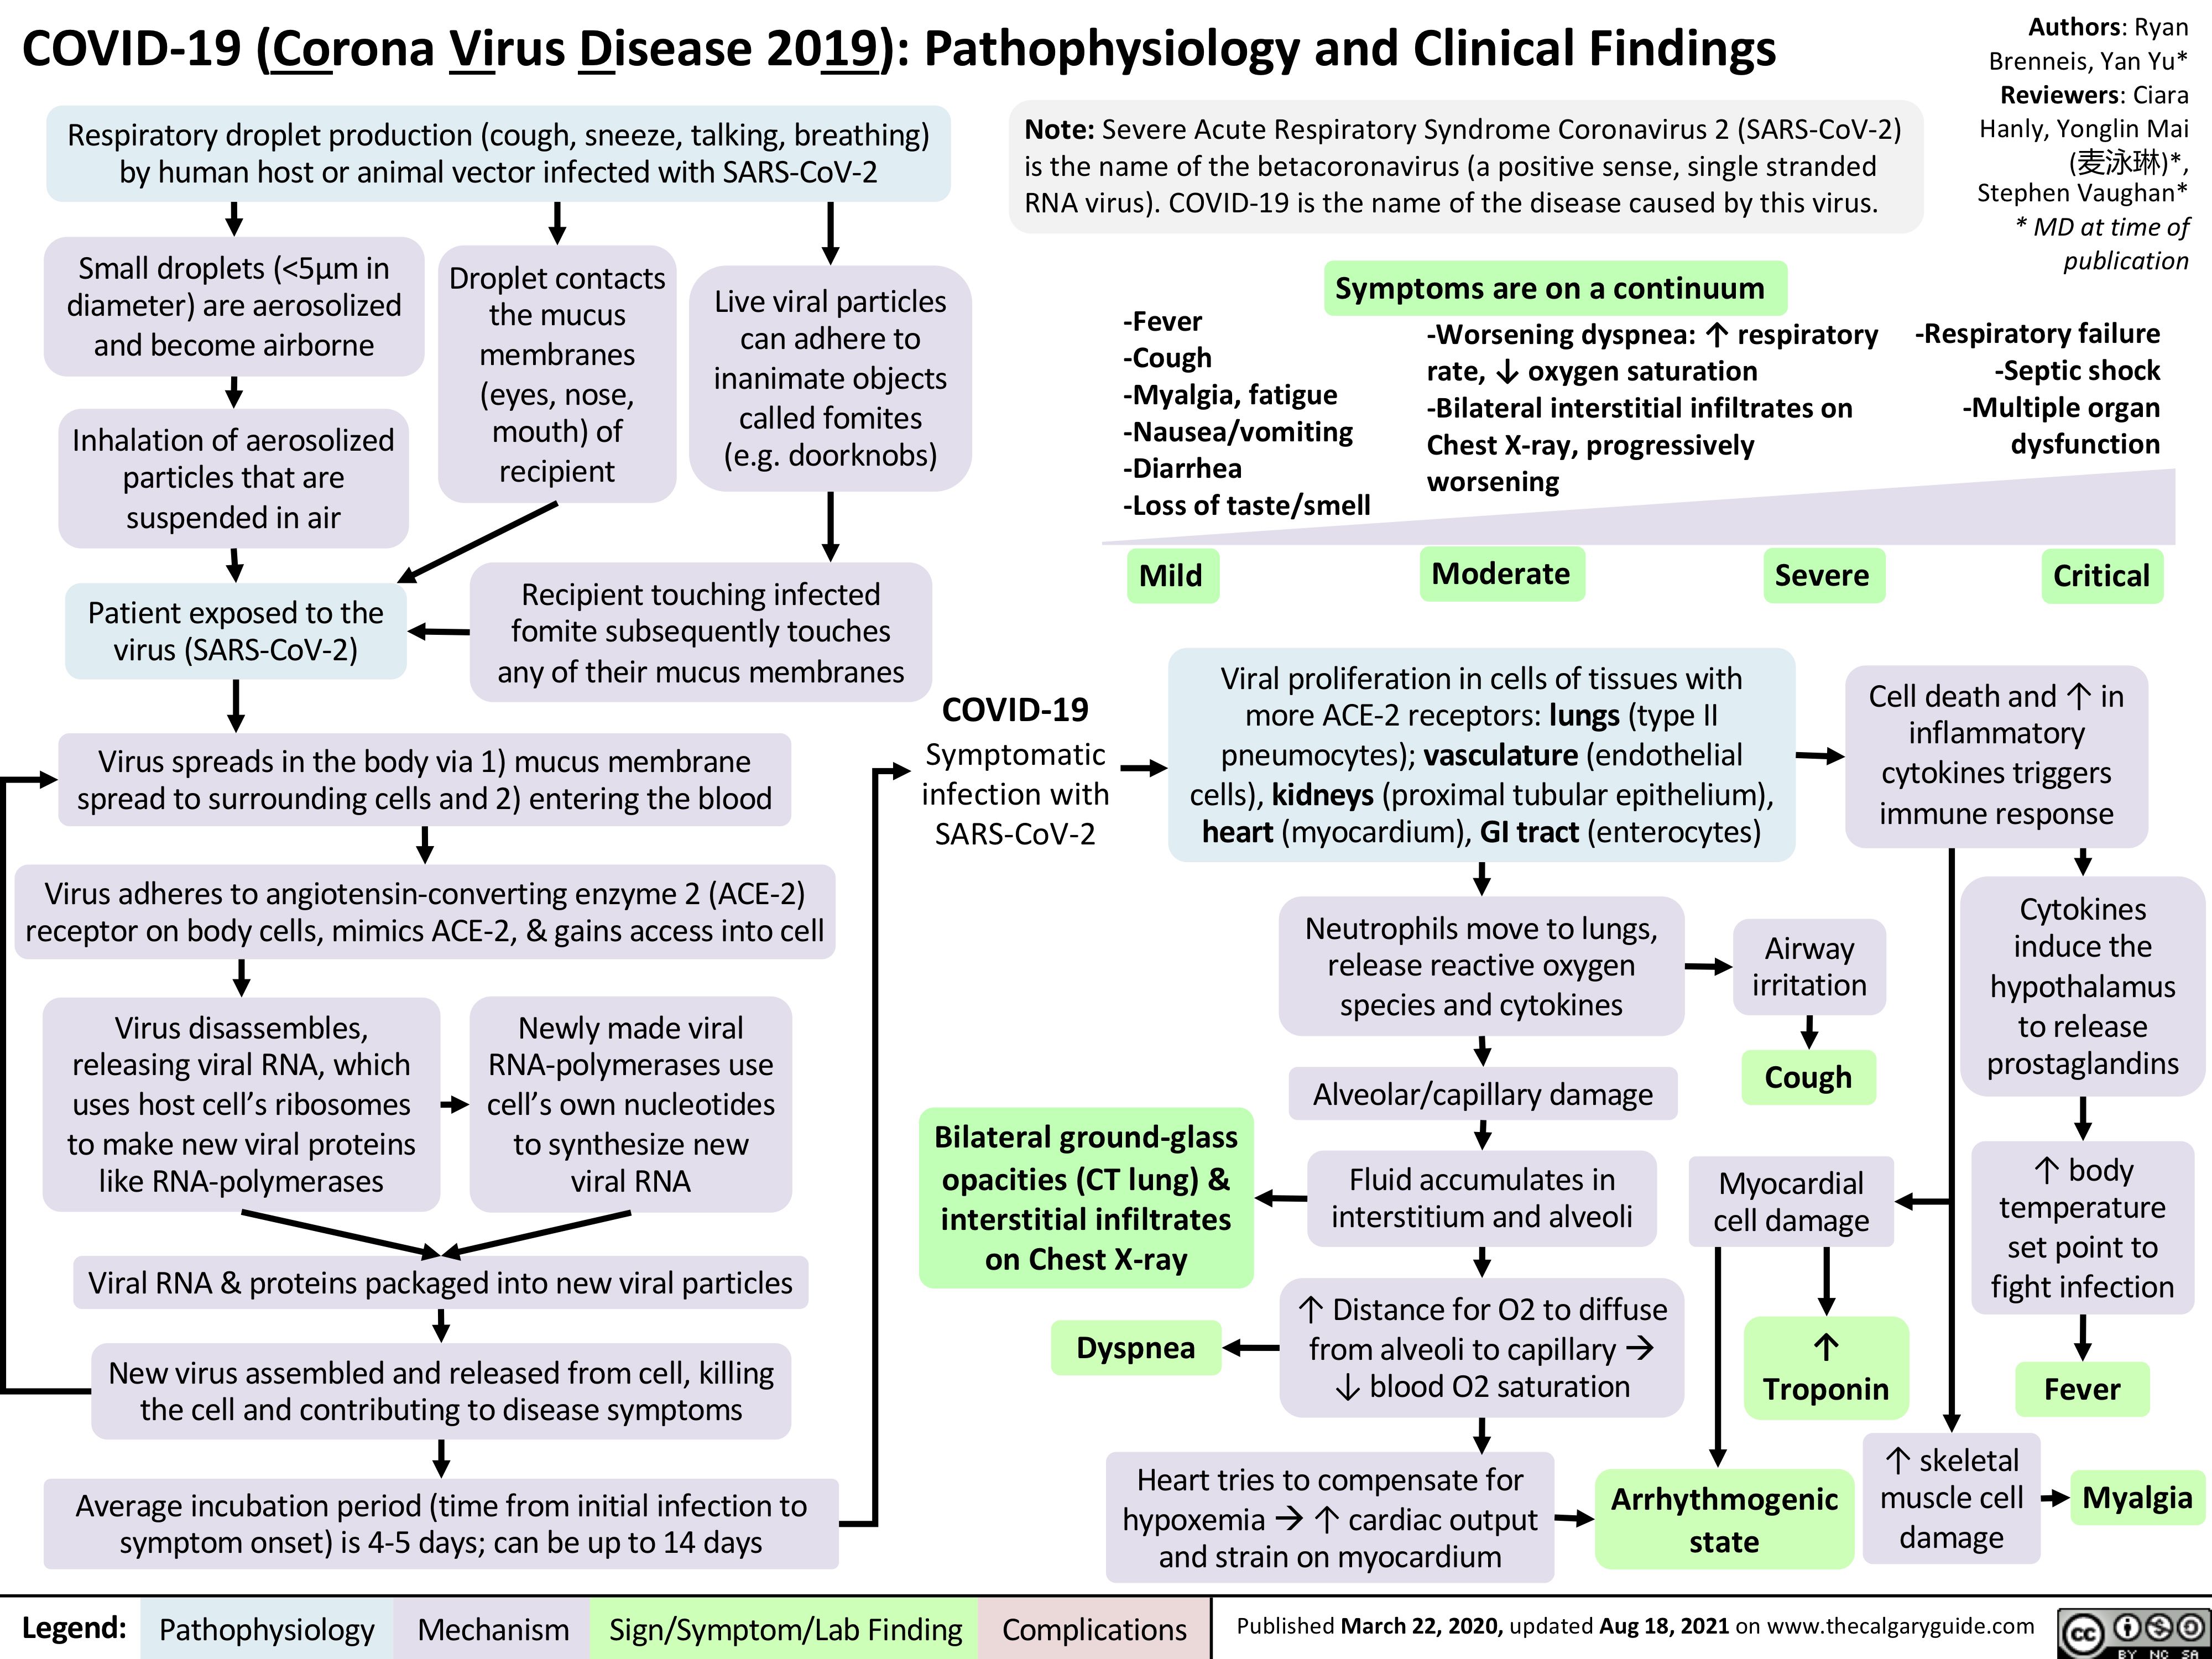 COVID-19 (Corona Virus Disease 2019): Pathophysiology and Clinical Findings
Authors: Ryan Brenneis, Yan Yu* Reviewers: Ciara Hanly, Yonglin Mai (􏰄􏰁􏰃)*, Stephen Vaughan* * MD at time of publication
-Respiratory failure -Septic shock -Multiple organ dysfunction
Critical
      Respiratory droplet production (cough, sneeze, talking, breathing) by human host or animal vector infected with SARS-CoV-2
Note: Severe Acute Respiratory Syndrome Coronavirus 2 (SARS-CoV-2) is the name of the betacoronavirus (a positive sense, single stranded RNA virus). COVID-19 is the name of the disease caused by this virus.
rate, ↓ oxygen saturation -Bilateral interstitial infiltrates on Chest X-ray, progressively worsening
     Small droplets (<5μm in diameter) are aerosolized and become airborne
Inhalation of aerosolized particles that are suspended in air
Patient exposed to the virus (SARS-CoV-2)
Droplet contacts the mucus membranes (eyes, nose, mouth) of recipient
Live viral particles can adhere to inanimate objects called fomites (e.g. doorknobs)
Symptoms are on a continuum -Worsening dyspnea: ↑ respiratory
    -Fever
-Cough
-Myalgia, fatigue -Nausea/vomiting -Diarrhea
-Loss of taste/smell
            Recipient touching infected fomite subsequently touches any of their mucus membranes
Mild
Moderate
Severe
      Virus spreads in the body via 1) mucus membrane spread to surrounding cells and 2) entering the blood
Virus adheres to angiotensin-converting enzyme 2 (ACE-2) receptor on body cells, mimics ACE-2, & gains access into cell
COVID-19
Symptomatic infection with SARS-CoV-2
Viral proliferation in cells of tissues with more ACE-2 receptors: lungs (type II pneumocytes); vasculature (endothelial cells), kidneys (proximal tubular epithelium), heart (myocardium), GI tract (enterocytes)
Cell death and ↑ in inflammatory cytokines triggers immune response
           Neutrophils move to lungs, release reactive oxygen species and cytokines
Alveolar/capillary damage
Fluid accumulates in interstitium and alveoli
↑ Distance for O2 to diffuse from alveoli to capillaryà ↓ blood O2 saturation
Cytokines induce the hypothalamus to release prostaglandins
↑ body temperature set point to fight infection
     Virus disassembles, releasing viral RNA, which uses host cell’s ribosomes to make new viral proteins like RNA-polymerases
Newly made viral RNA-polymerases use cell’s own nucleotides to synthesize new viral RNA
Bilateral ground-glass opacities (CT lung) & interstitial infiltrates on Chest X-ray
Dyspnea
Airway irritation
Cough
Myocardial cell damage
↑ Troponin
↑ skeletal muscle cell damage
                  Viral RNA & proteins packaged into new viral particles
New virus assembled and released from cell, killing the cell and contributing to disease symptoms
Average incubation period (time from initial infection to symptom onset) is 4-5 days; can be up to 14 days
Heart tries to compensate for
Fever Myalgia
              hypoxemiaà↑ cardiac output   Arrhythmogenic
  and strain on myocardium
state
 Legend:
 Pathophysiology
Mechanism
Sign/Symptom/Lab Finding
  Complications
 Published March 22, 2020, updated Aug 18, 2021 on www.thecalgaryguide.com
   